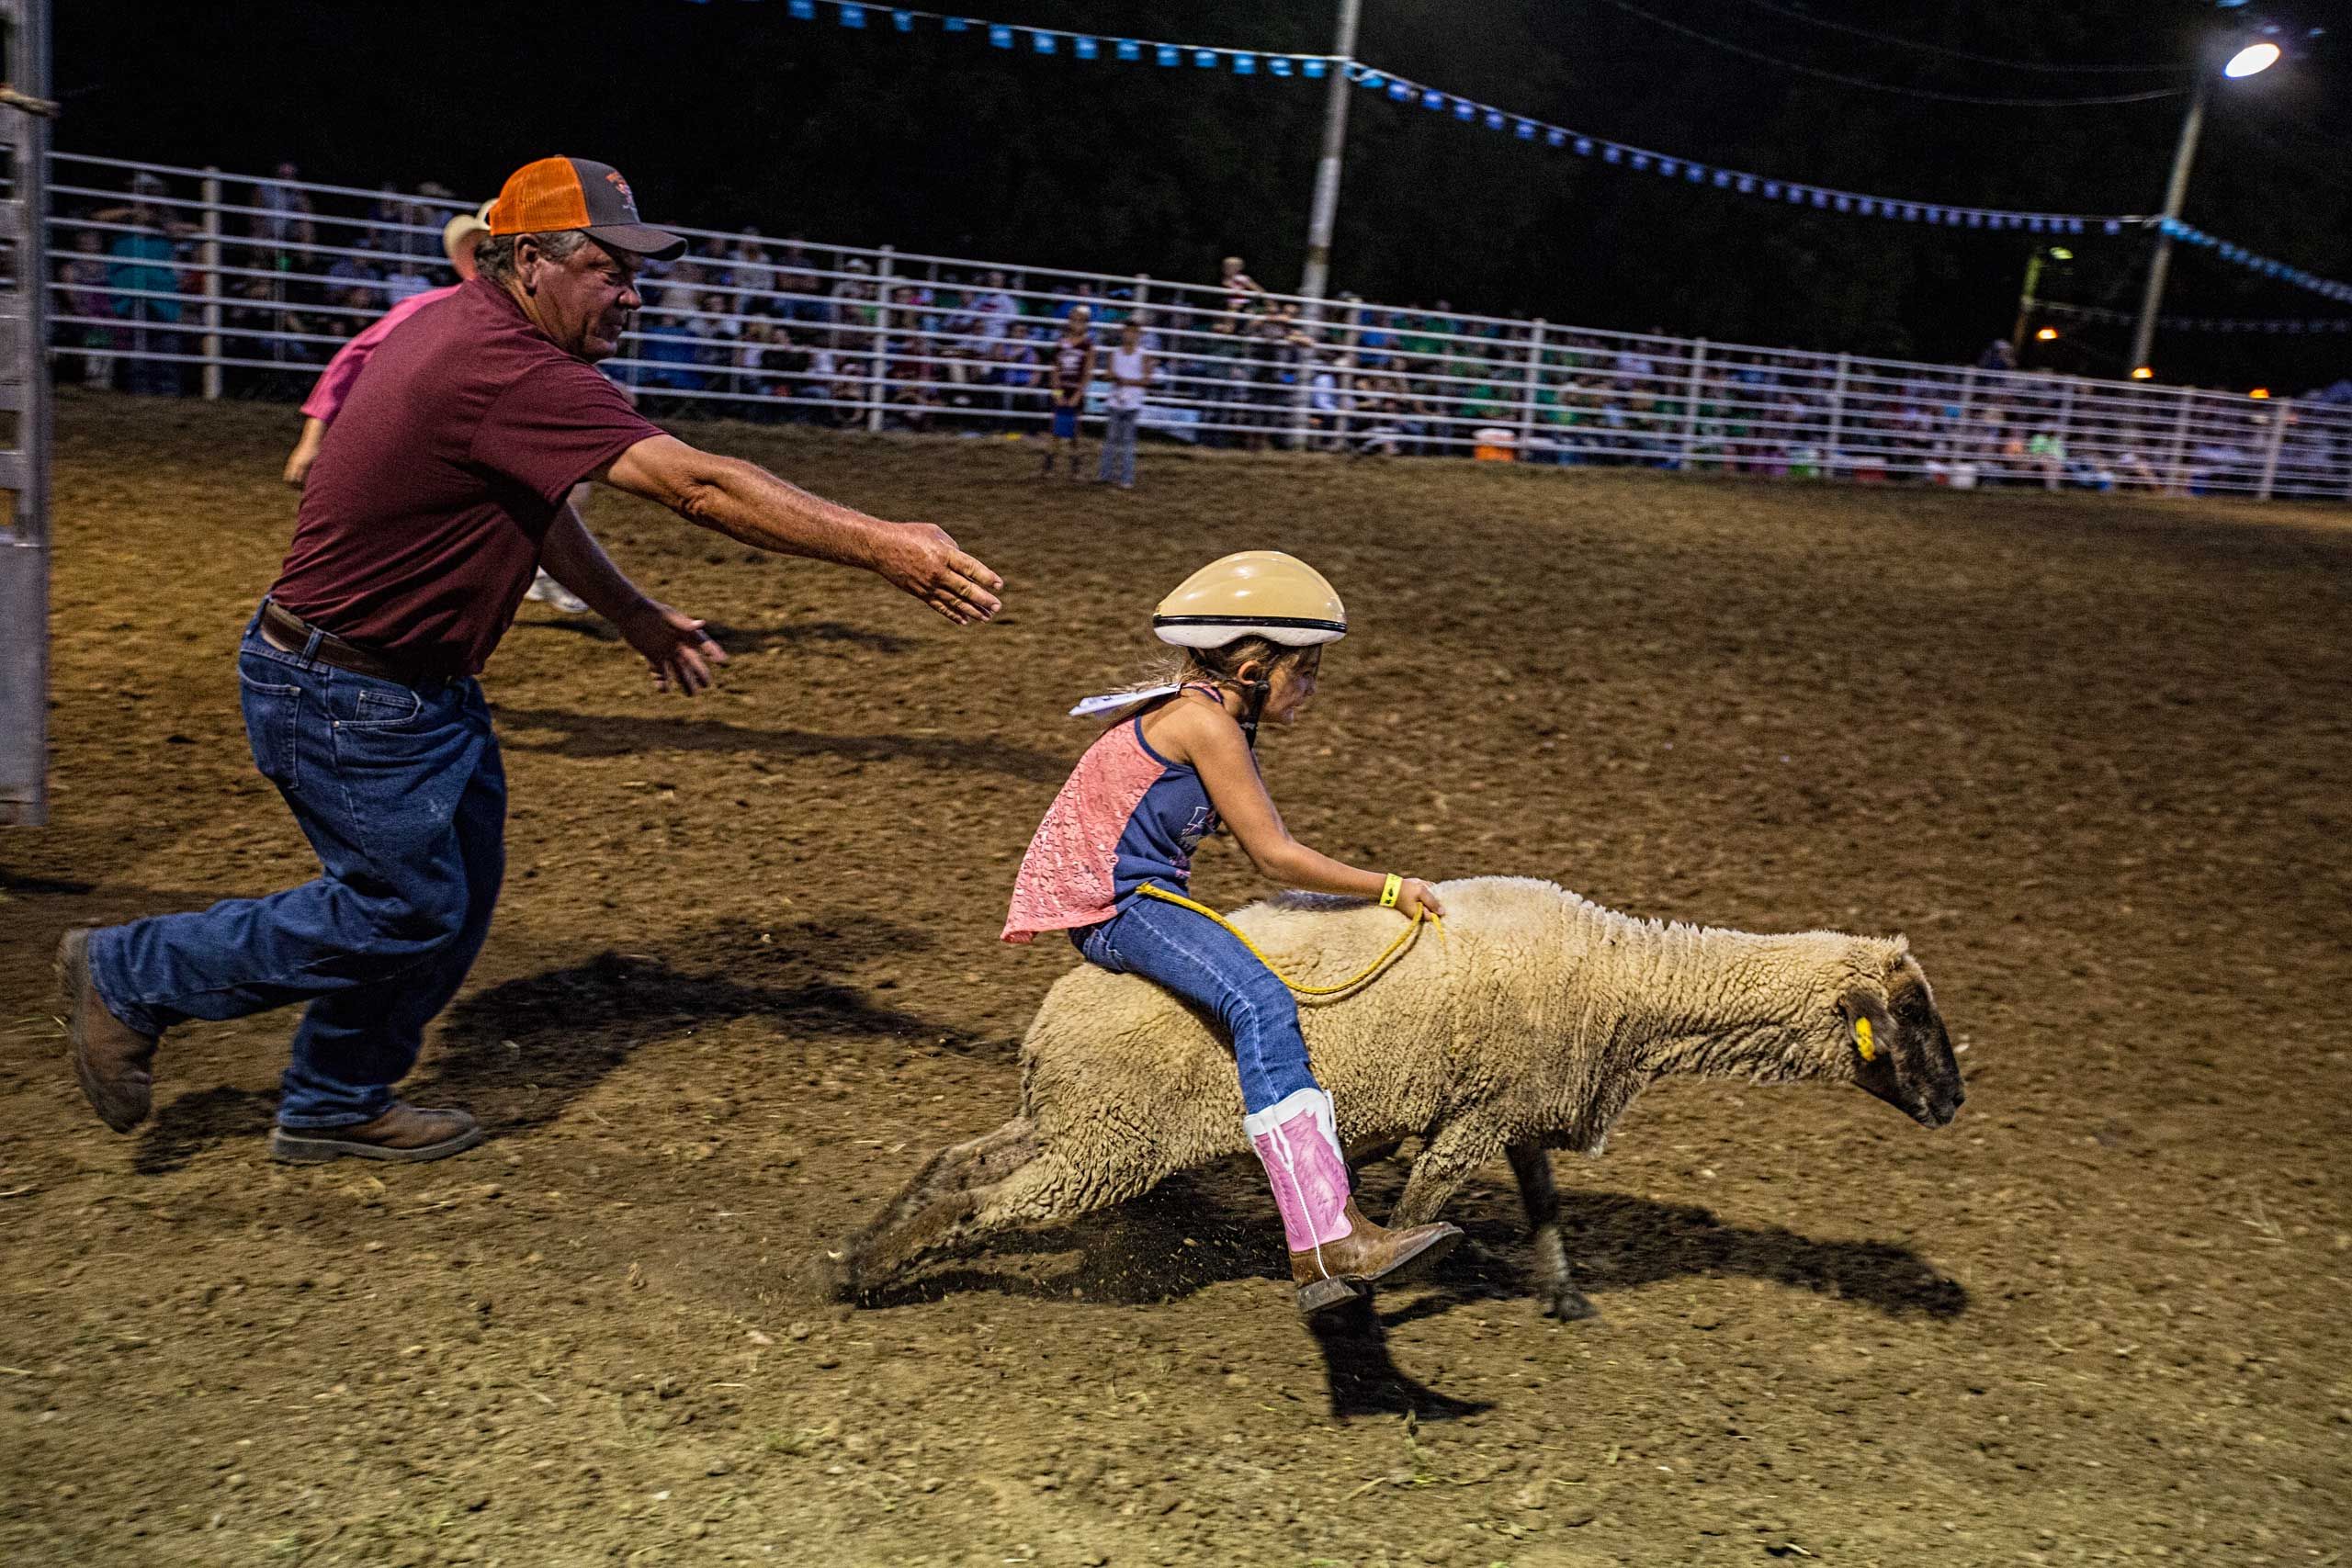 Lamb Mutton Busting Racing at a Rodeo